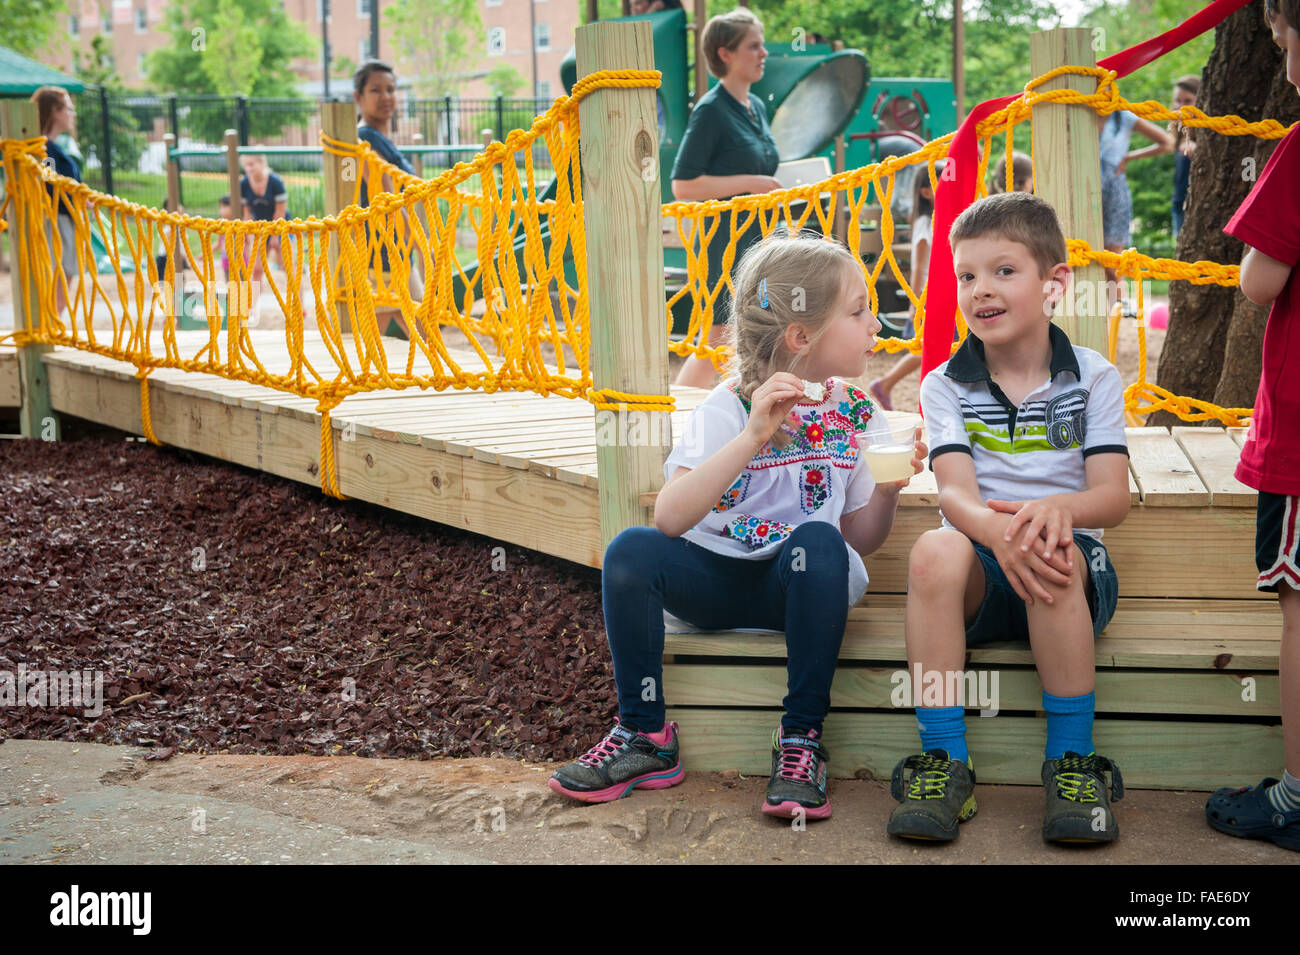 Children sitting together at a playground. Stock Photo